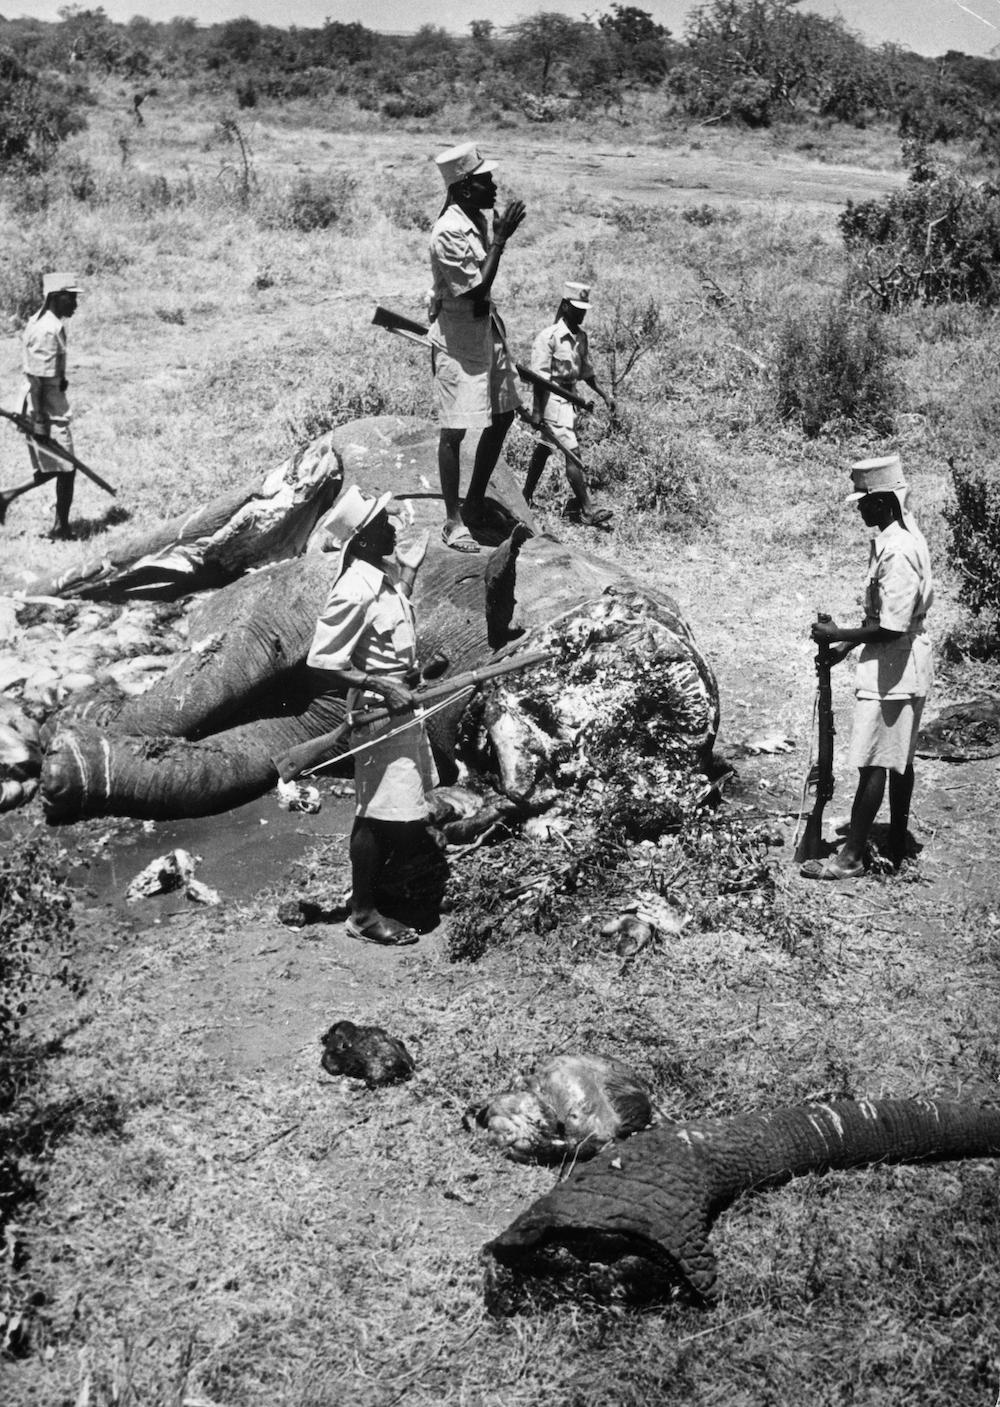 Kenyan ivory poachers surround a dead elephant with its tusks removed in August 1973 (Keystone Features/Getty Images)